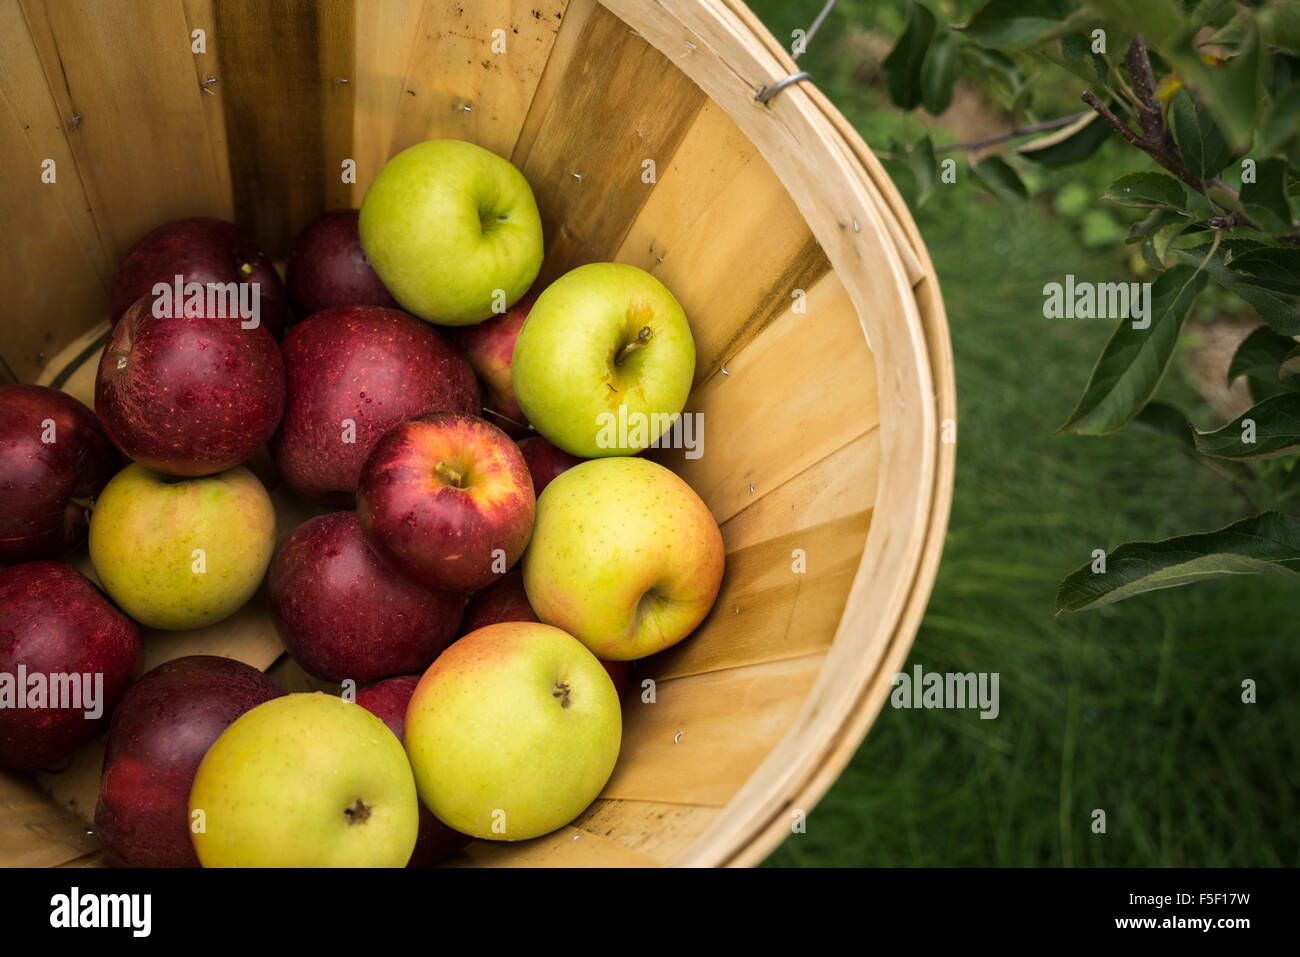 A bushel of multicolored apples being picked at an orchard Stock Photo